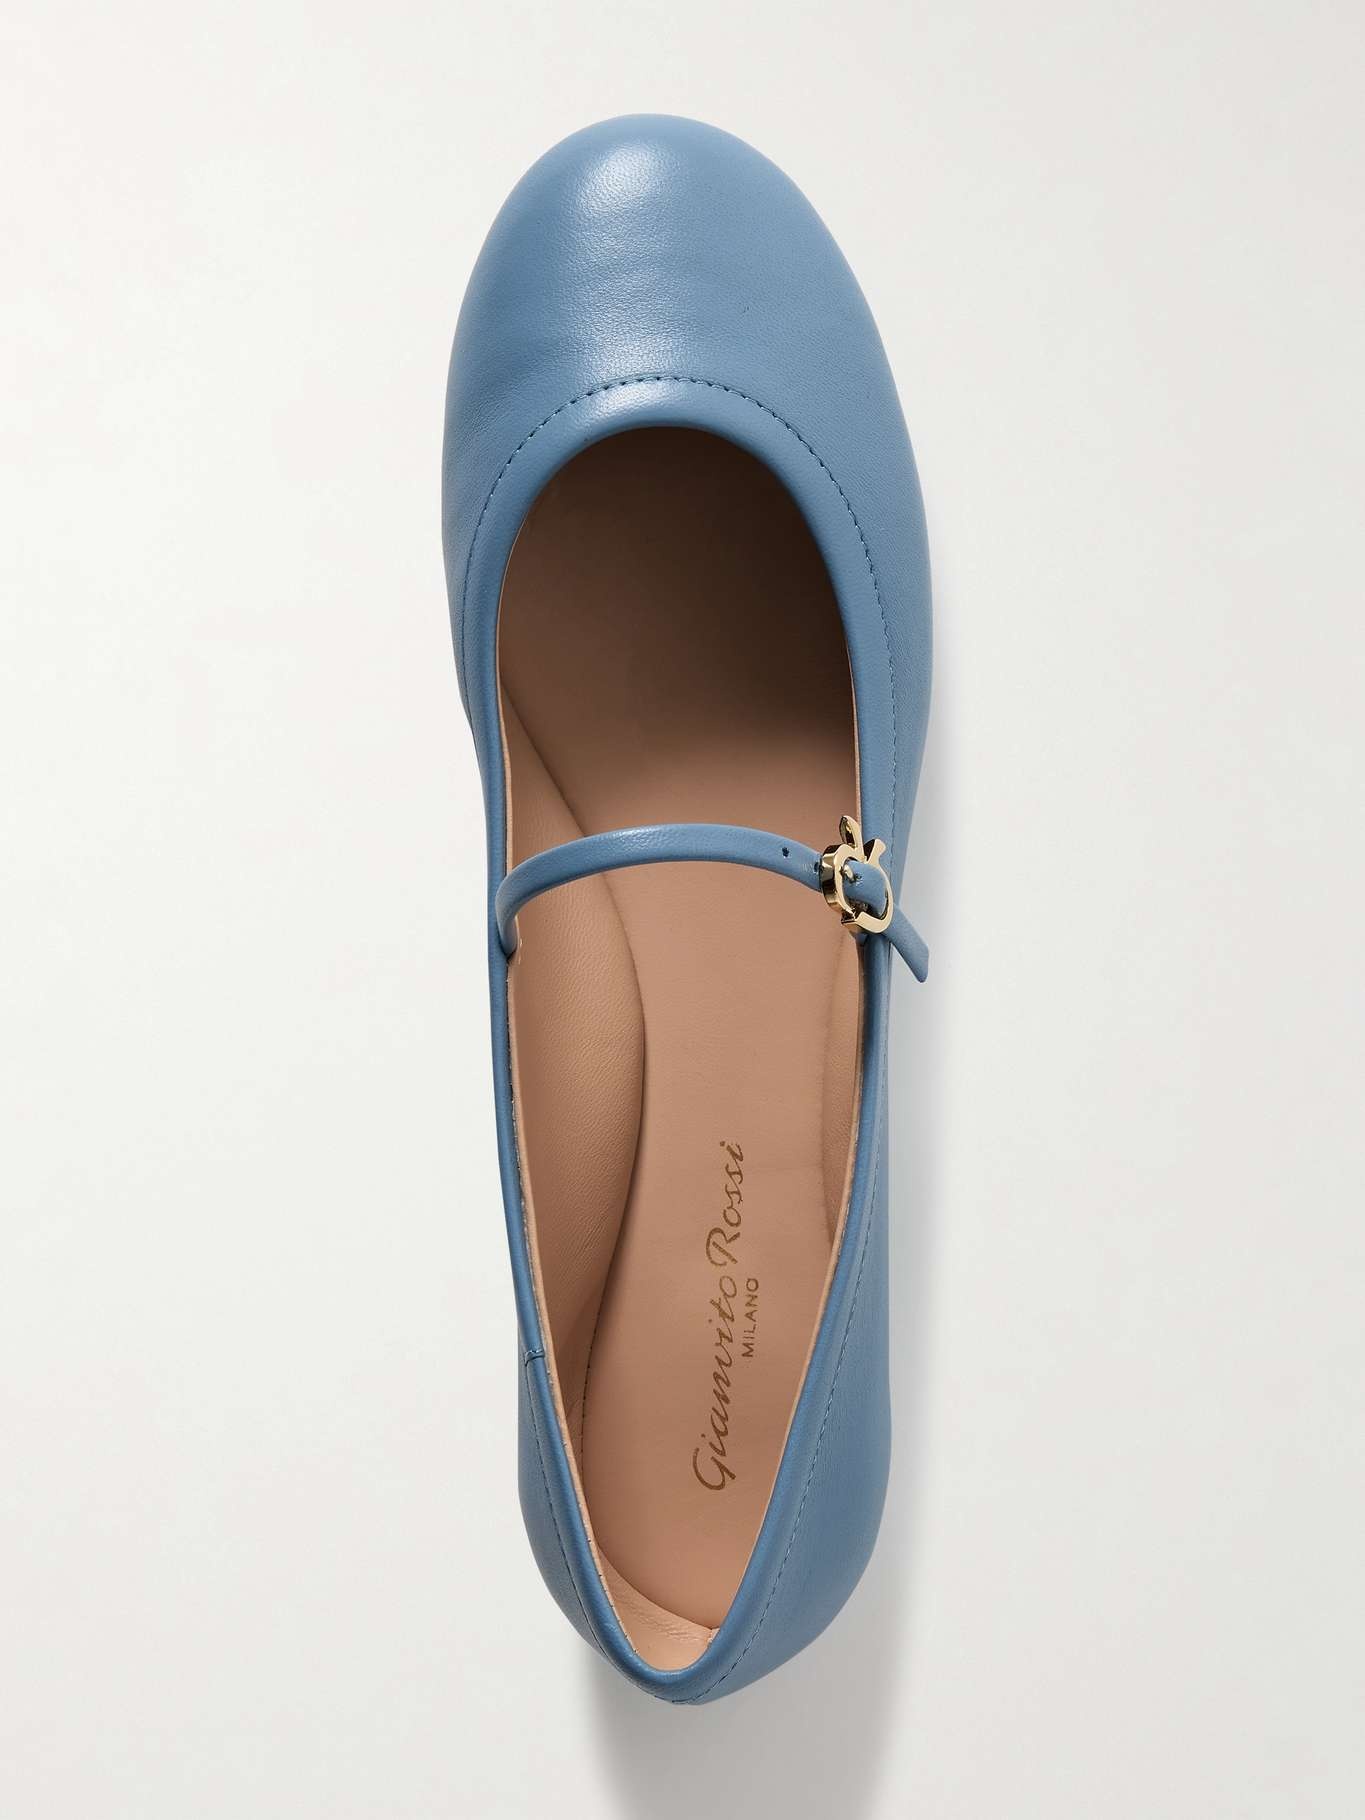 Carla leather Mary Jane ballet flats - 5